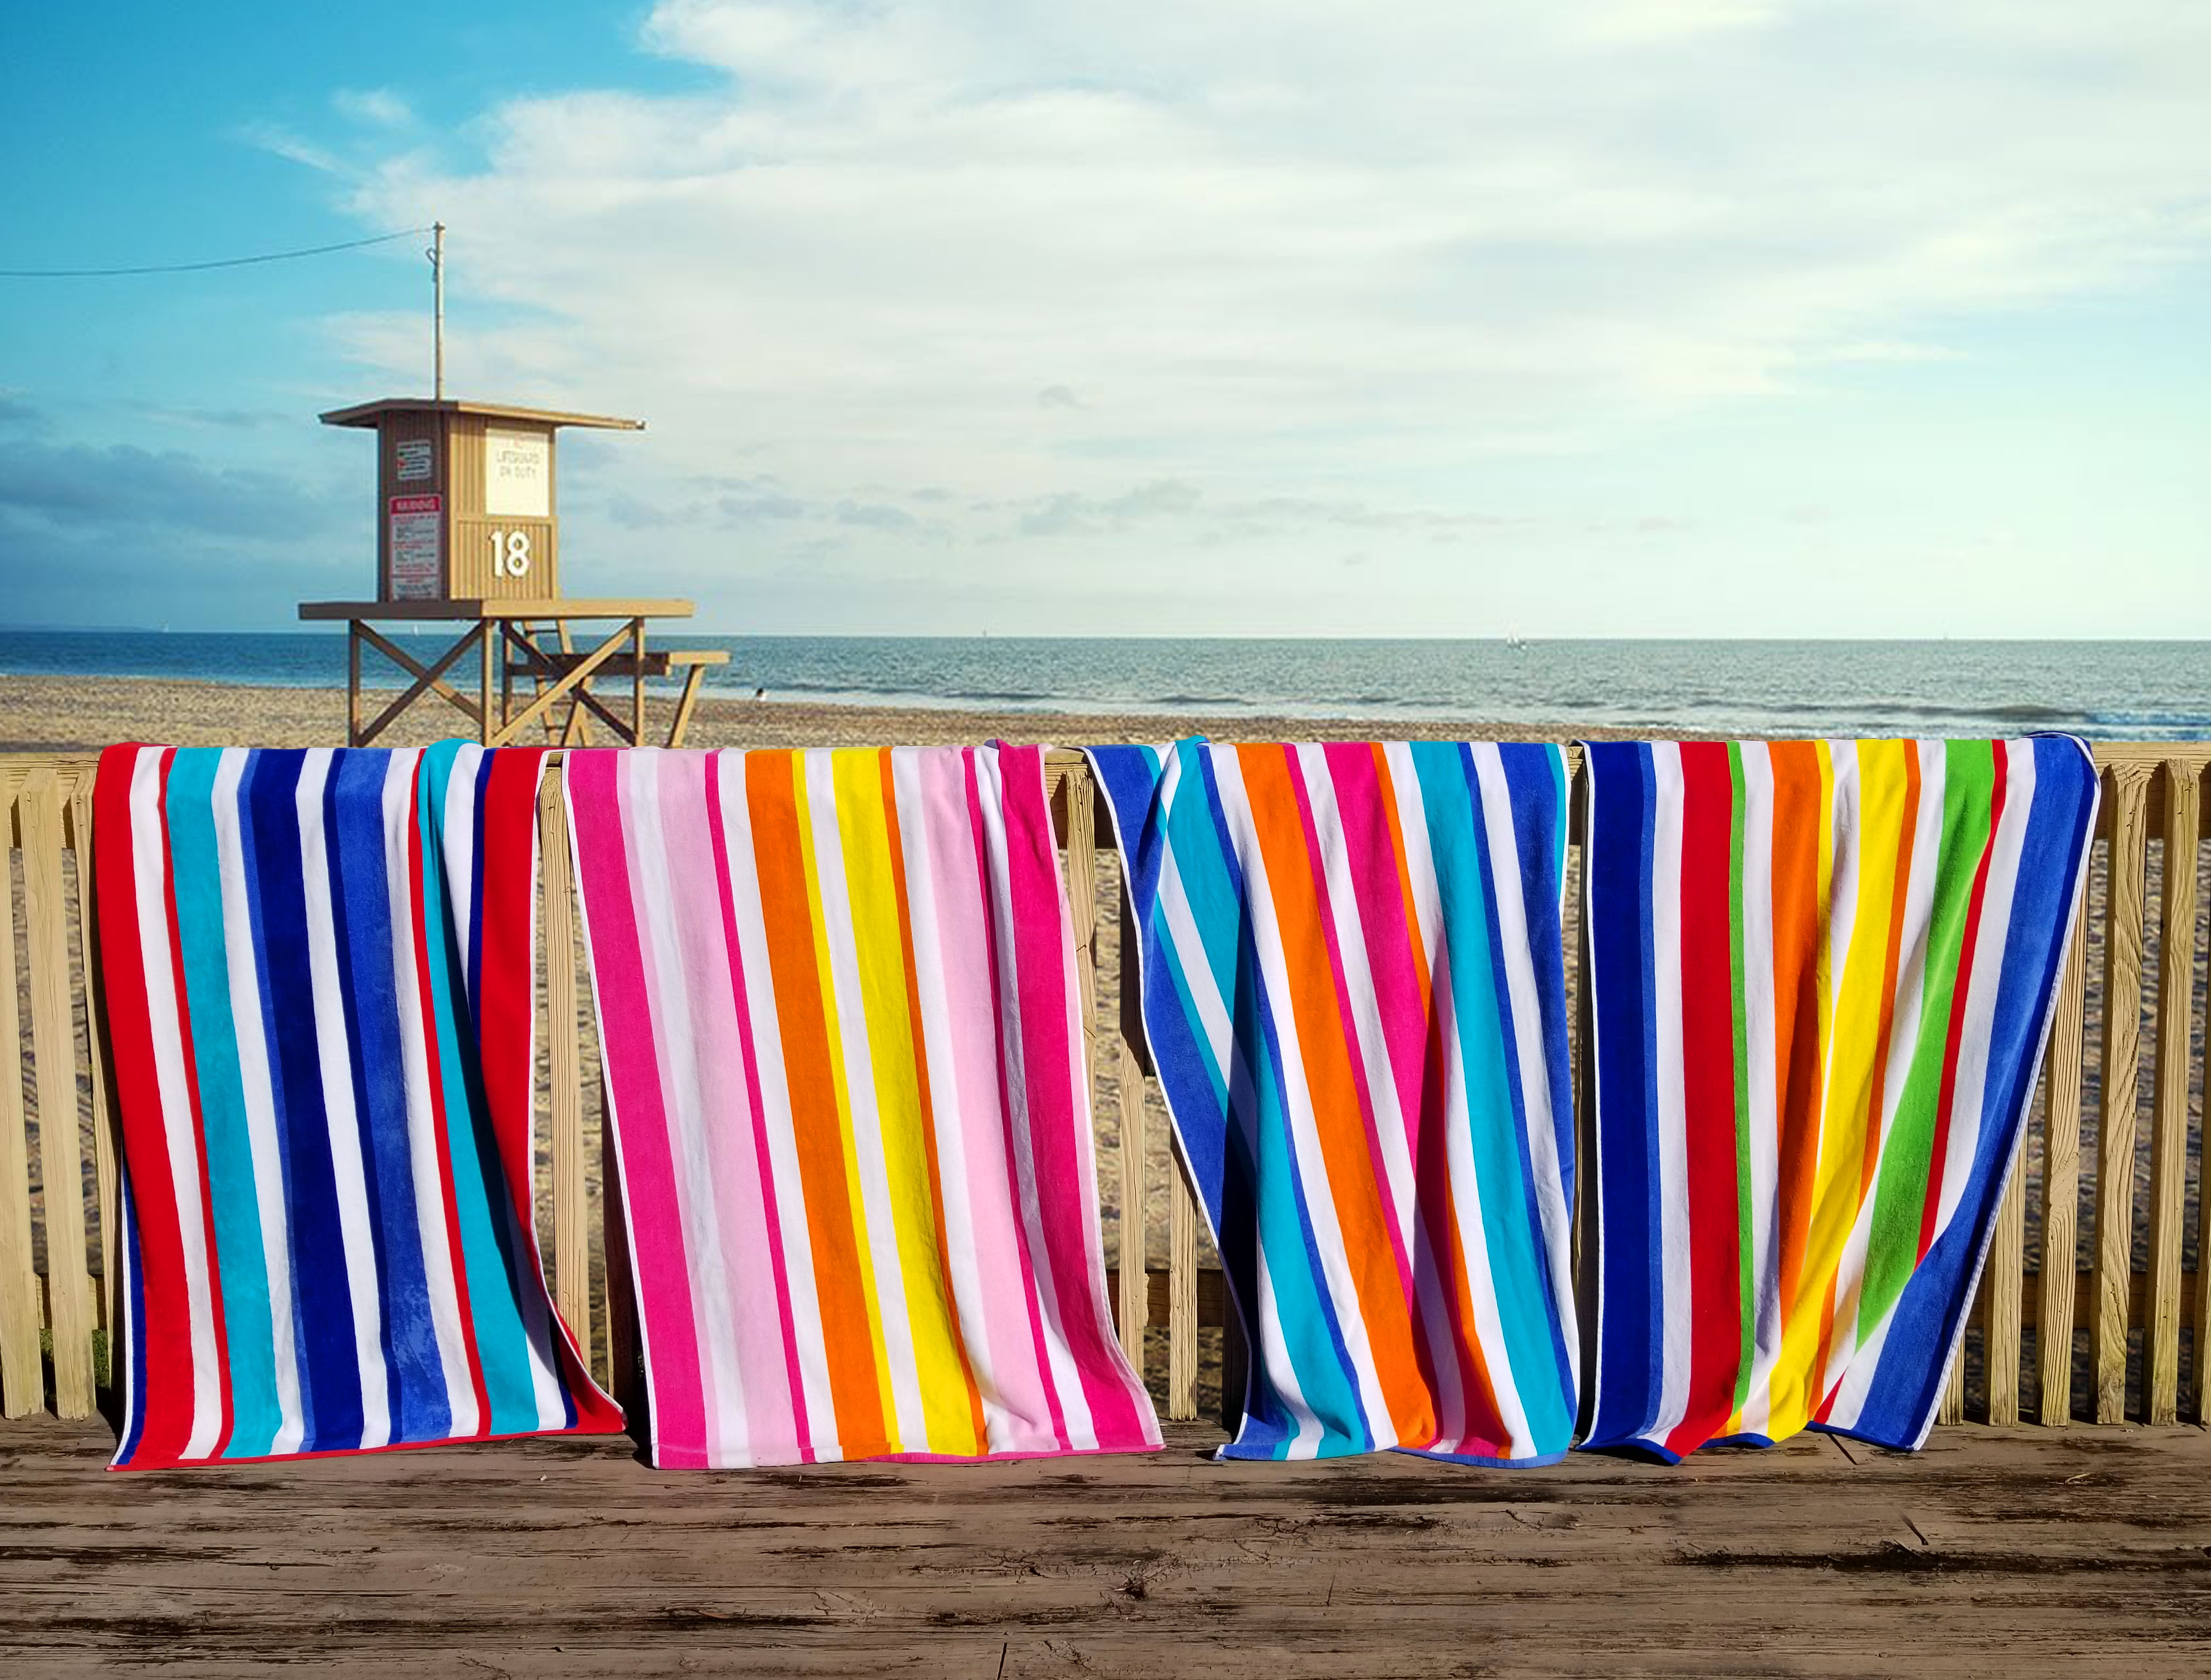 http://d3izeps273dd1j.cloudfront.net/images/blanks/cabana-striped-beach-towels-terry-velour-large%20-Soft-absorbent-bright-colors-100_%20cotton-Oversized-34x64-on-beach-fence.jpg